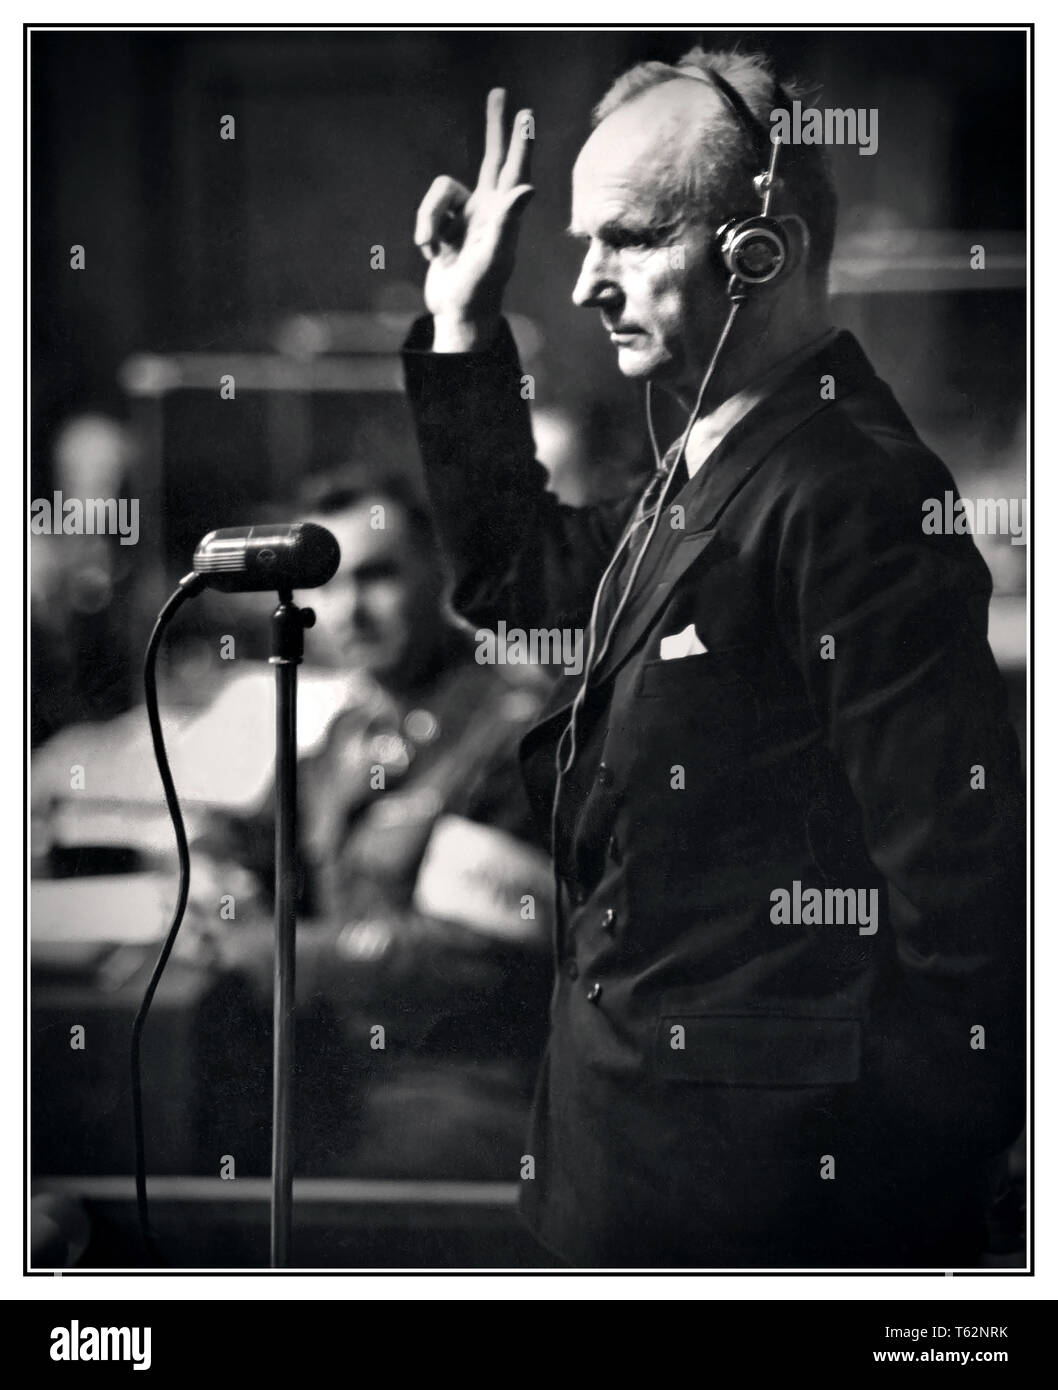 1946 NUREMBERG Karl Donitz Grand Admiral Nazi Germany. Adolf Hitlers successor at the Nuremberg War Trials. Naval Commander, Grand Admiral Karl Donitz raises his hand in oath before taking the witness stand at the International Military Tribunal Palace of Justice Nuremberg Germany 29th August 1946. Stock Photo